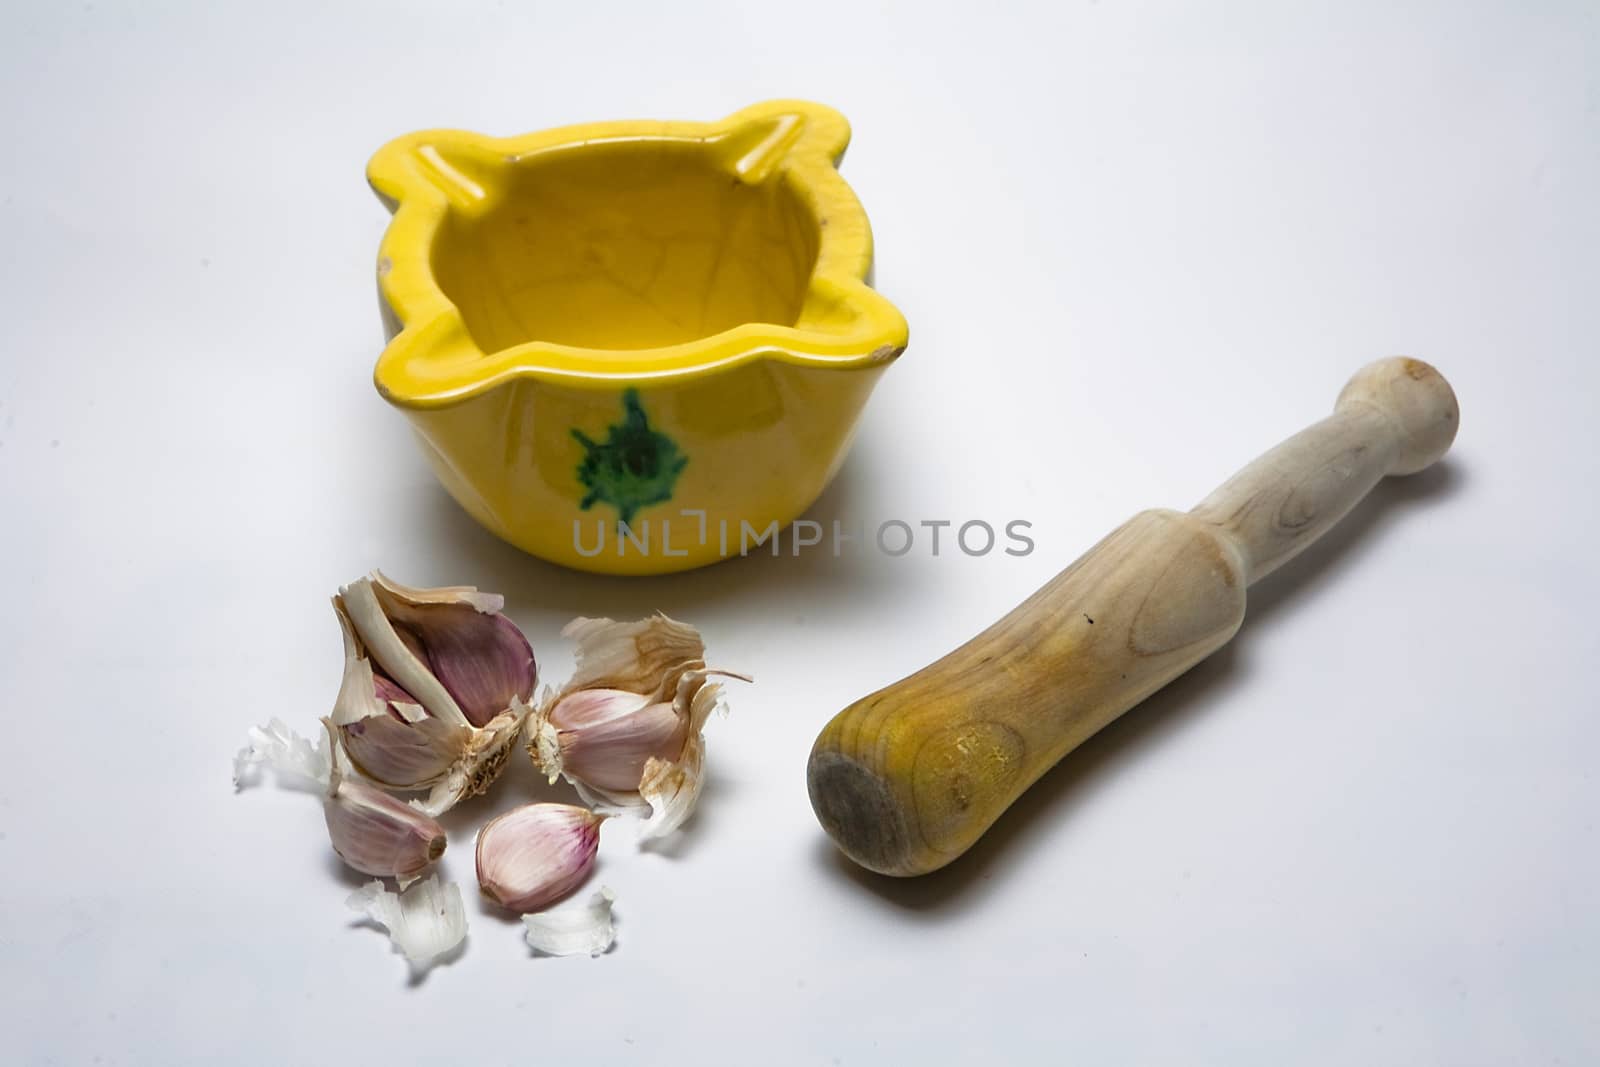   Ceramic mortar and garlic, used in the Spanish traditional kitchen, Spain